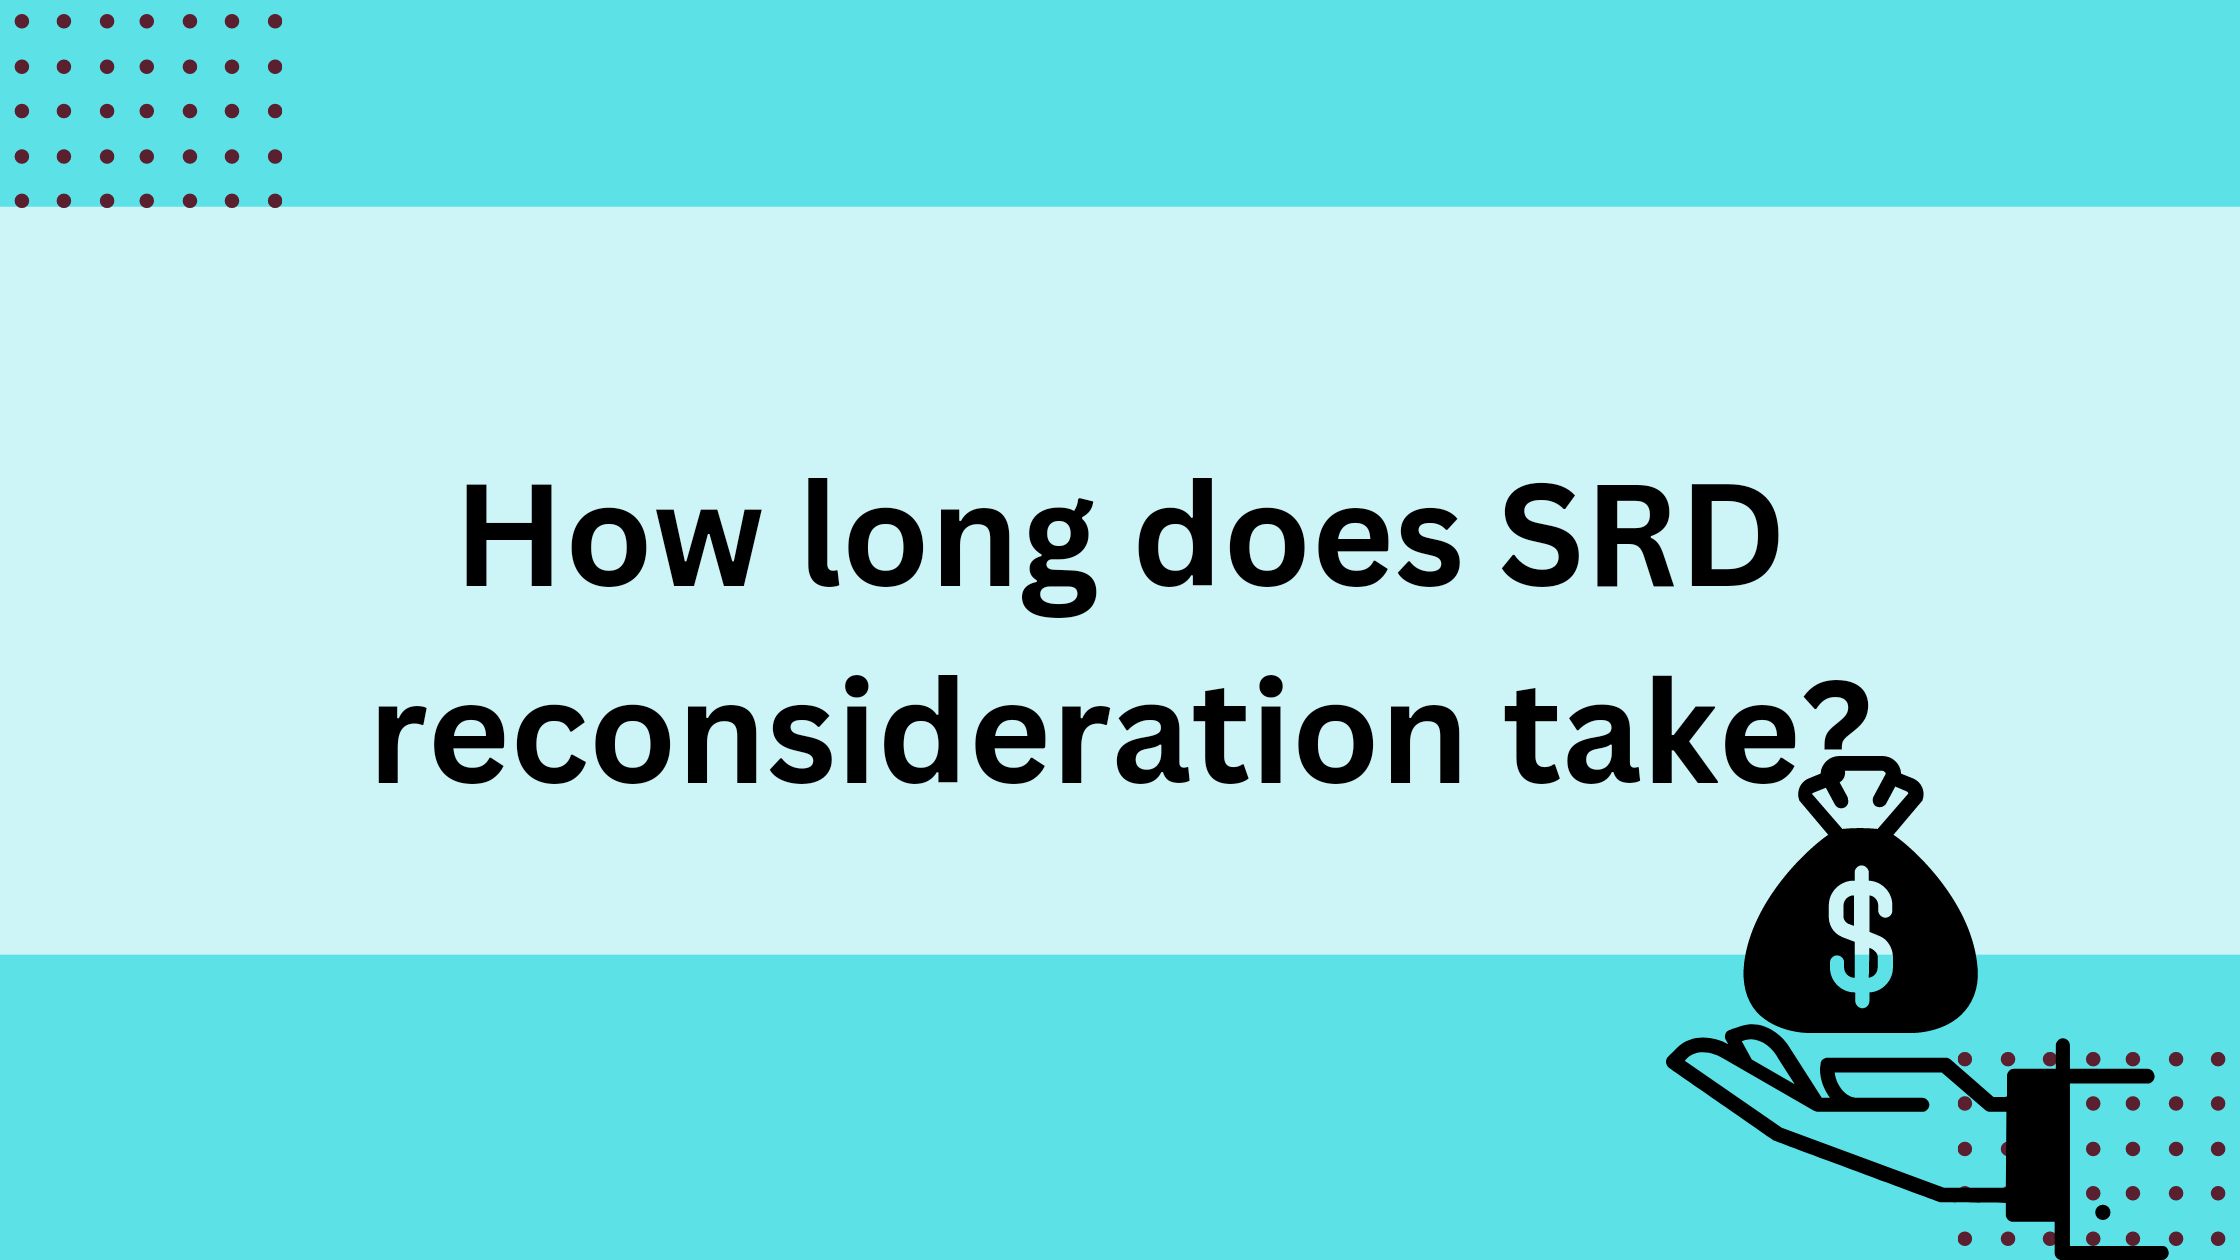 How long does SRD reconsideration take?